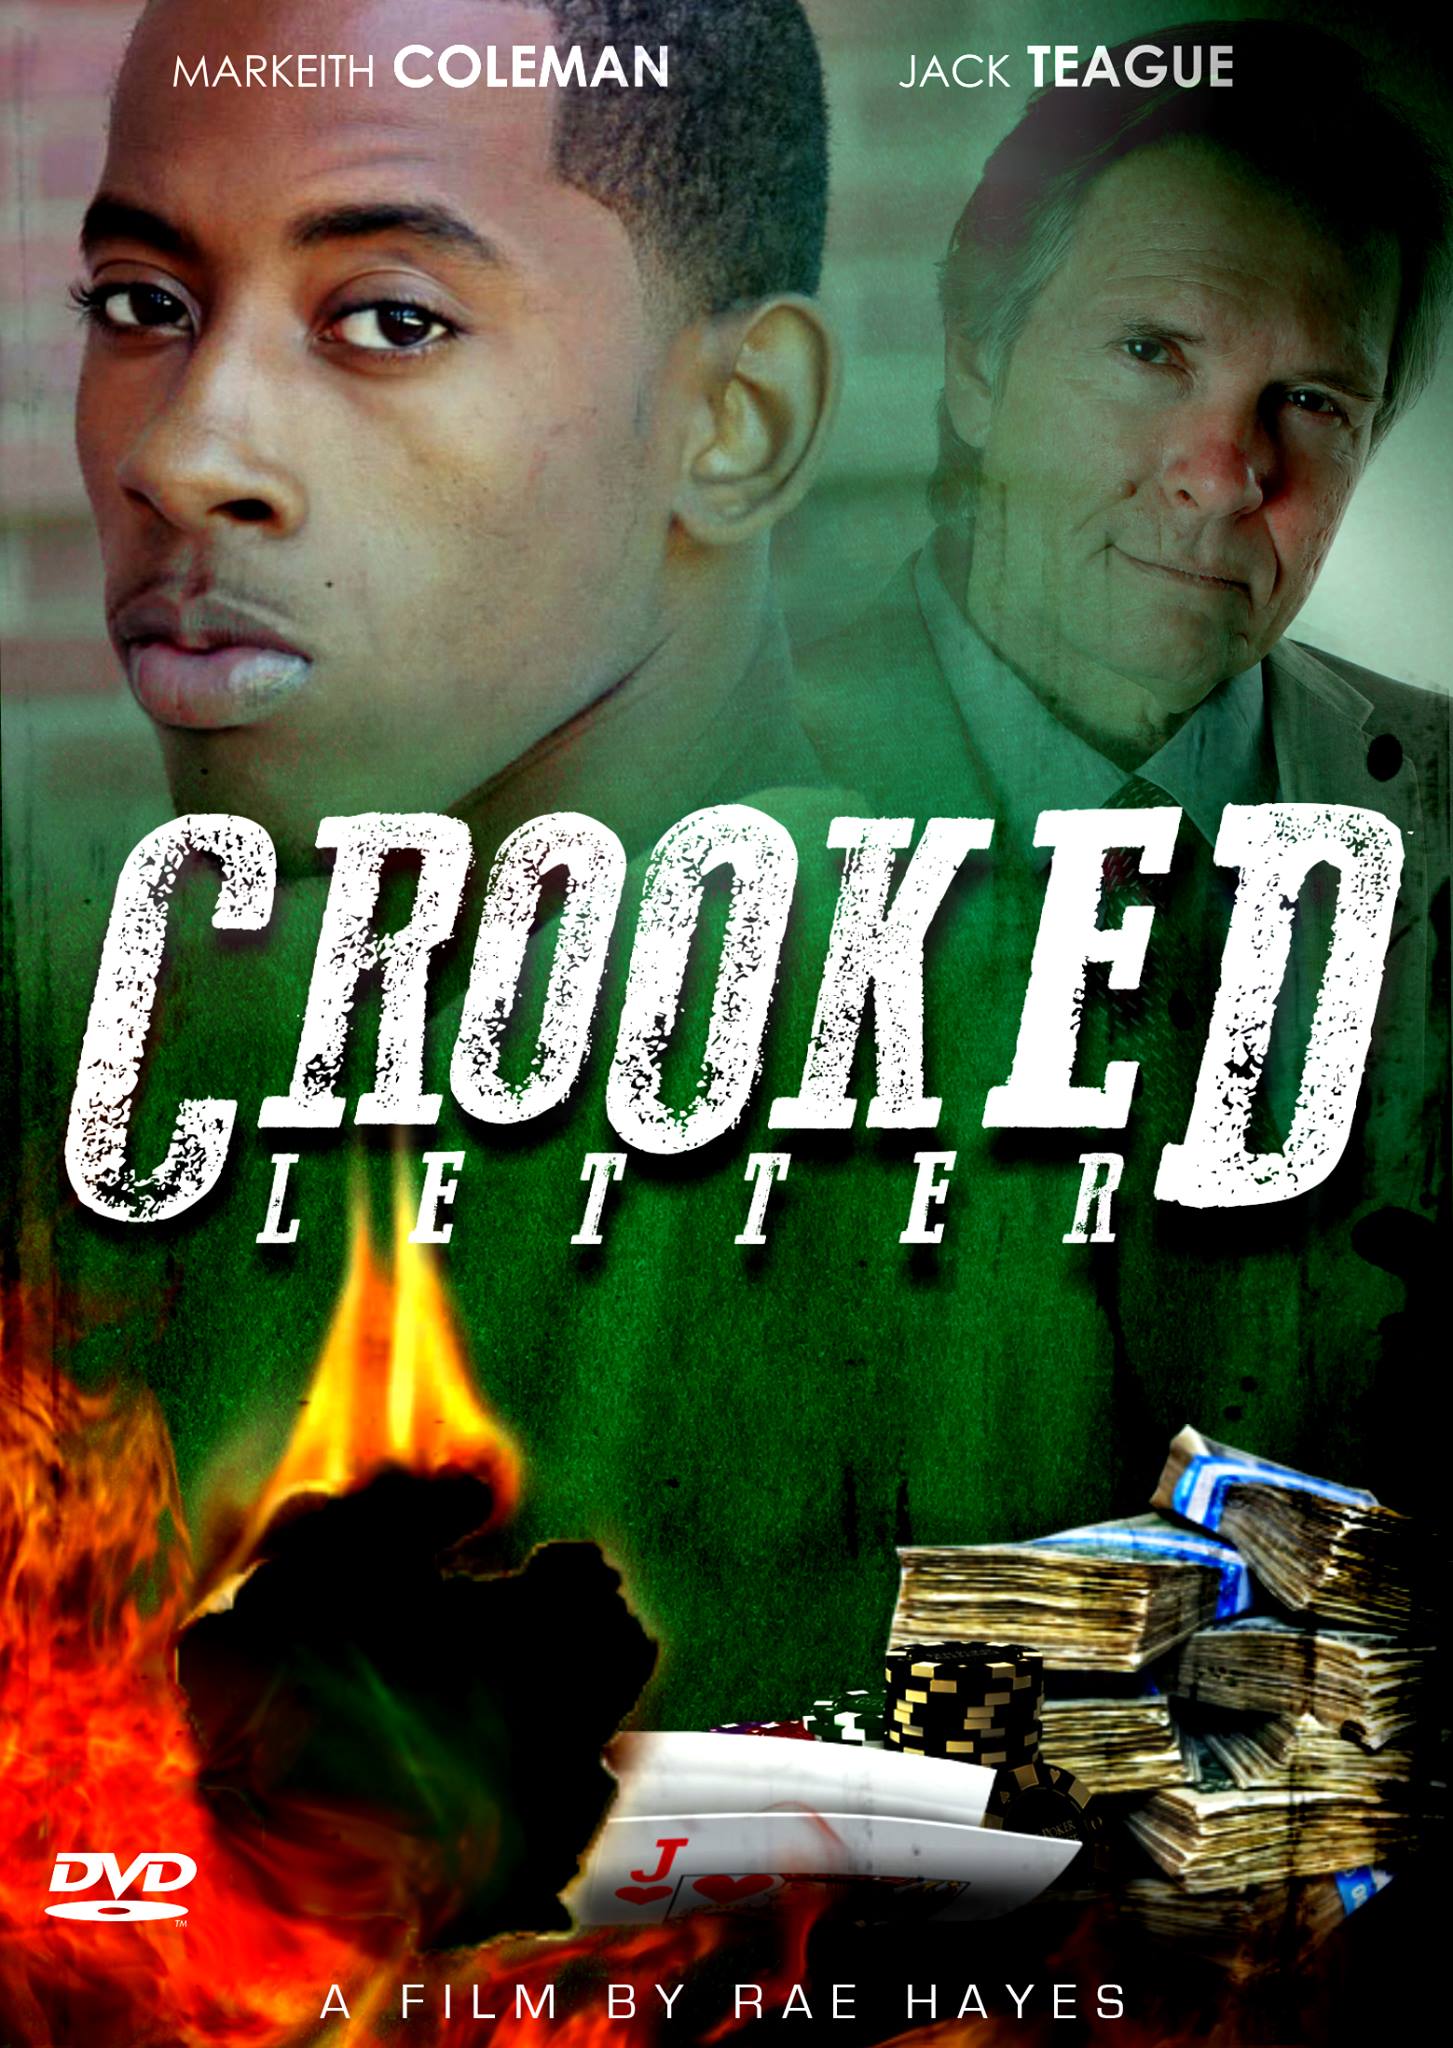 Poster for Crooked Letter